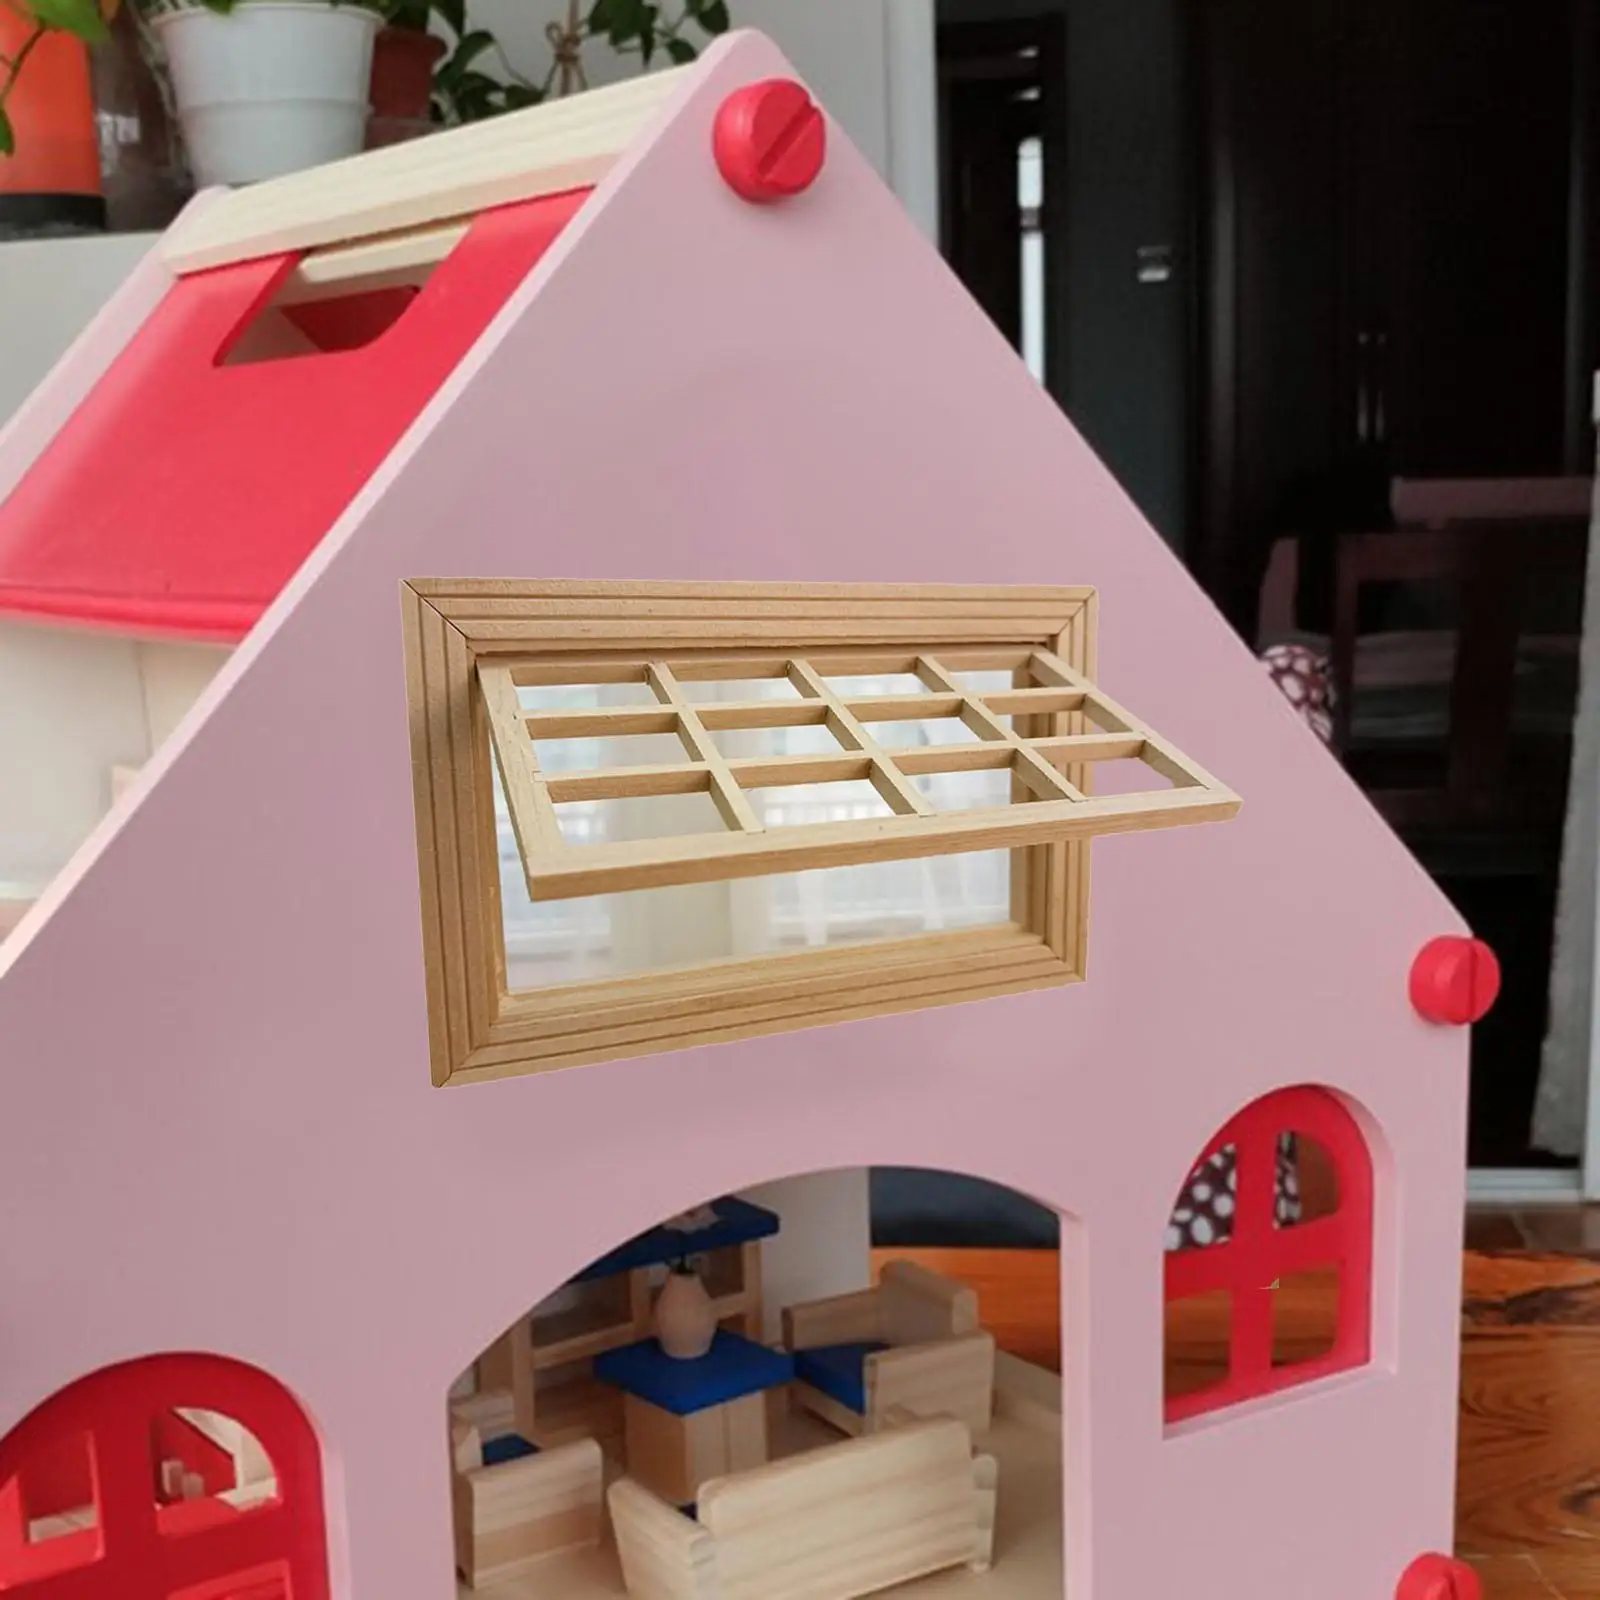 Miniature Doll`S House Furniture Wooden Window with 12 Panes DIY Play Toy